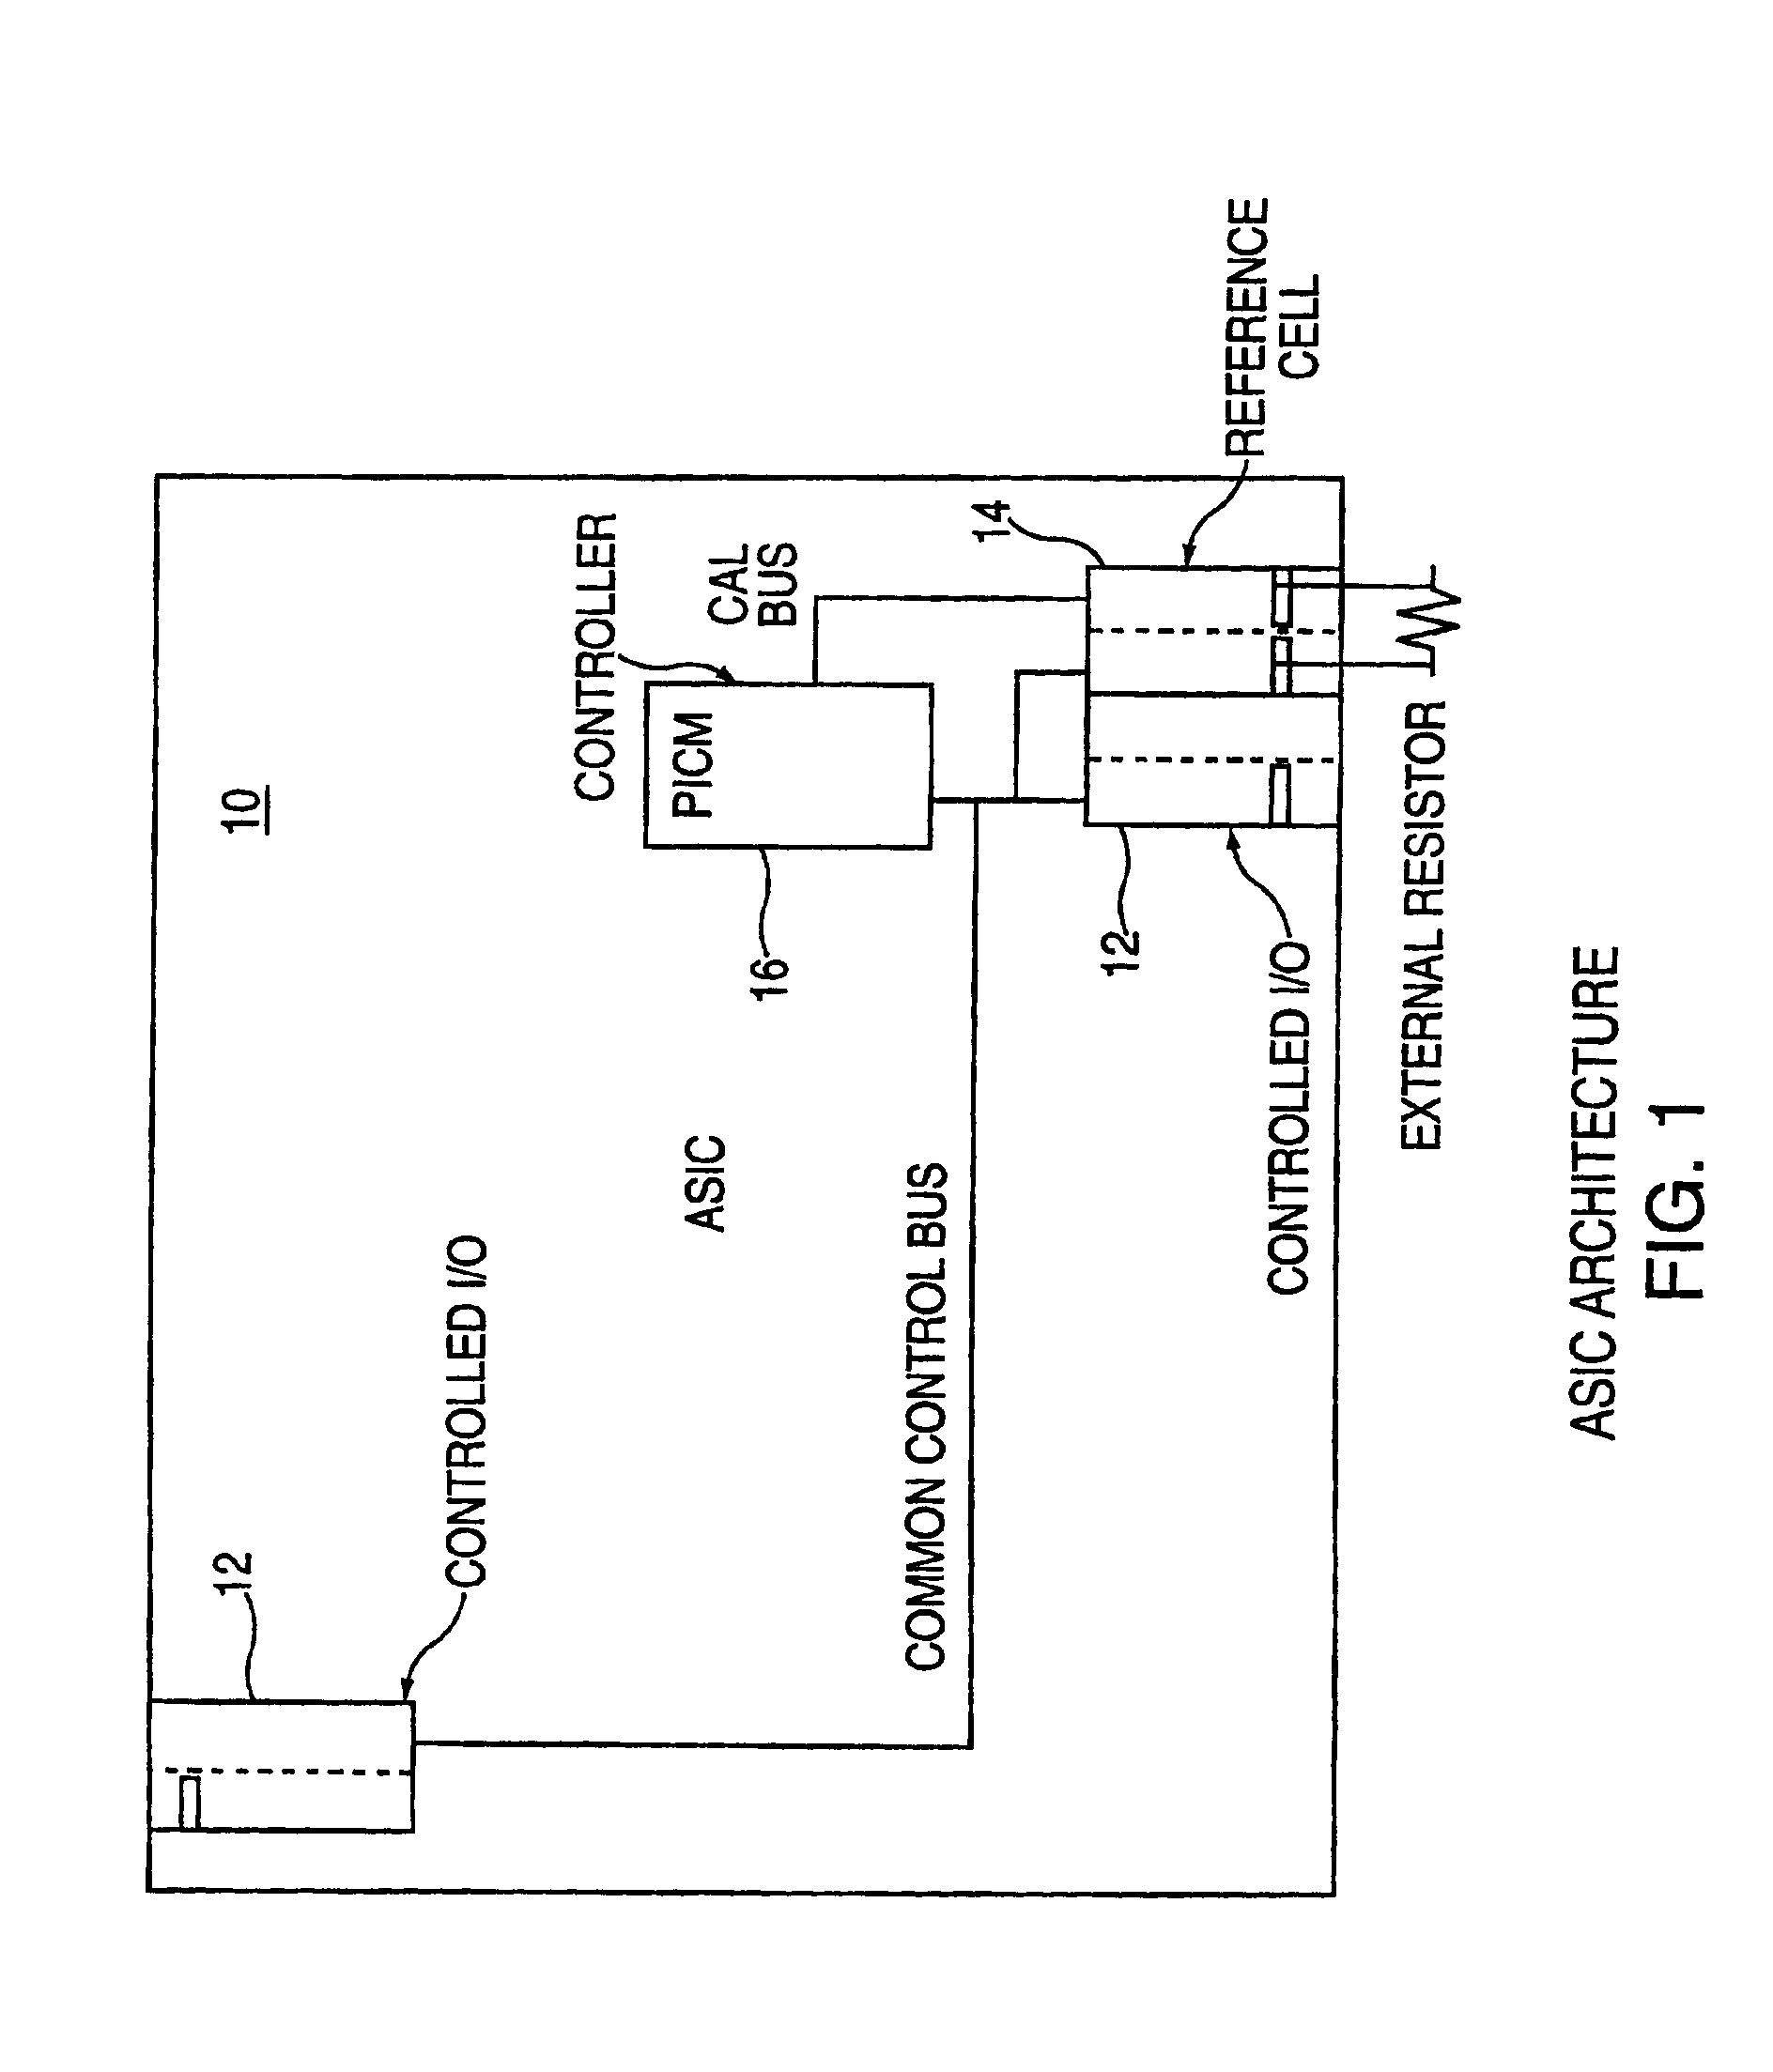 ASIC architecture for active-compensation of a programmable impedance I/O